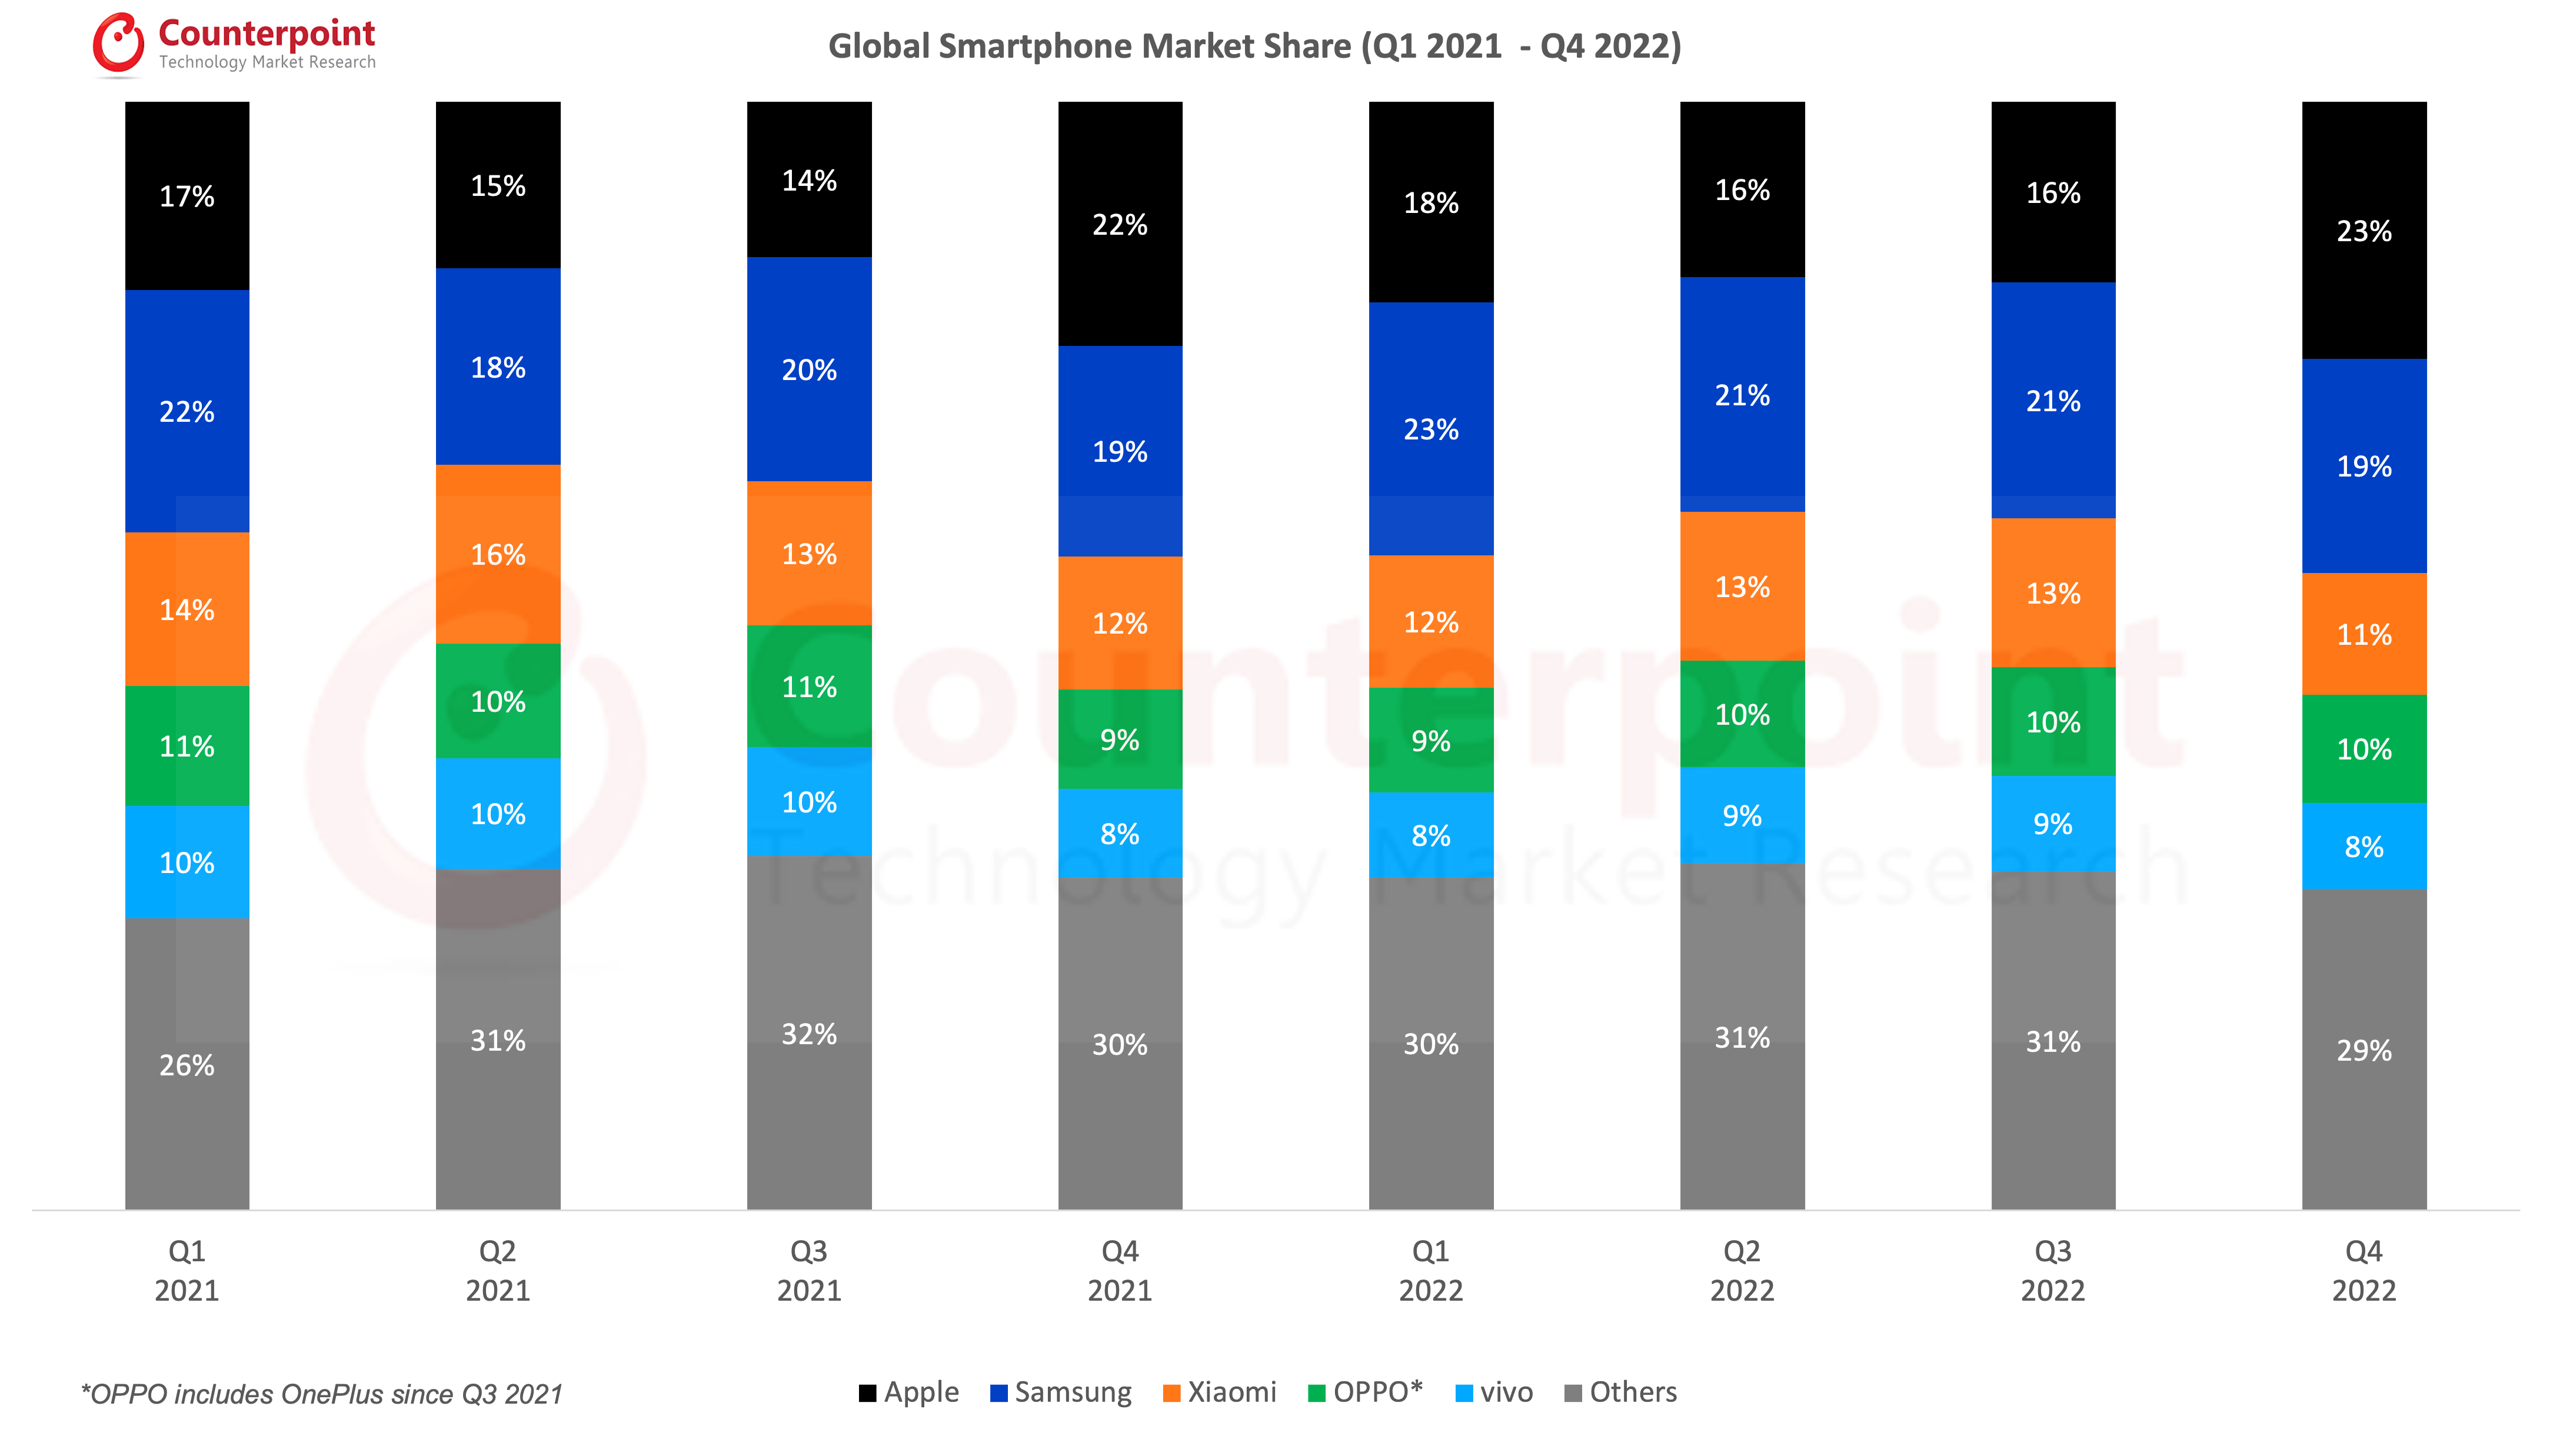 Global Smartphone Market Share Q3 2021 to Q2 2023